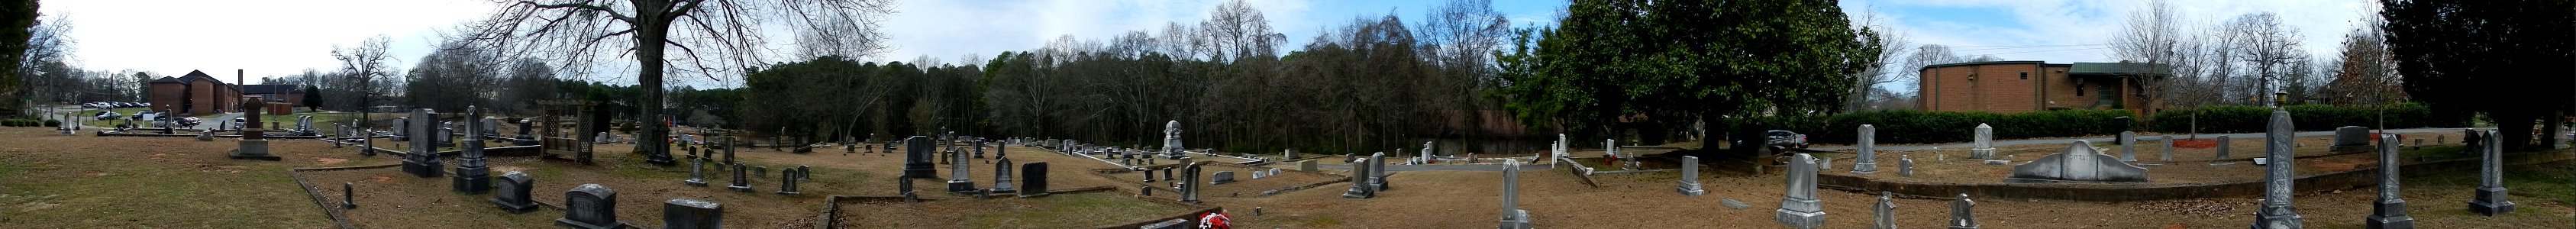 Day 31 - Kennesaw Cemetery photo